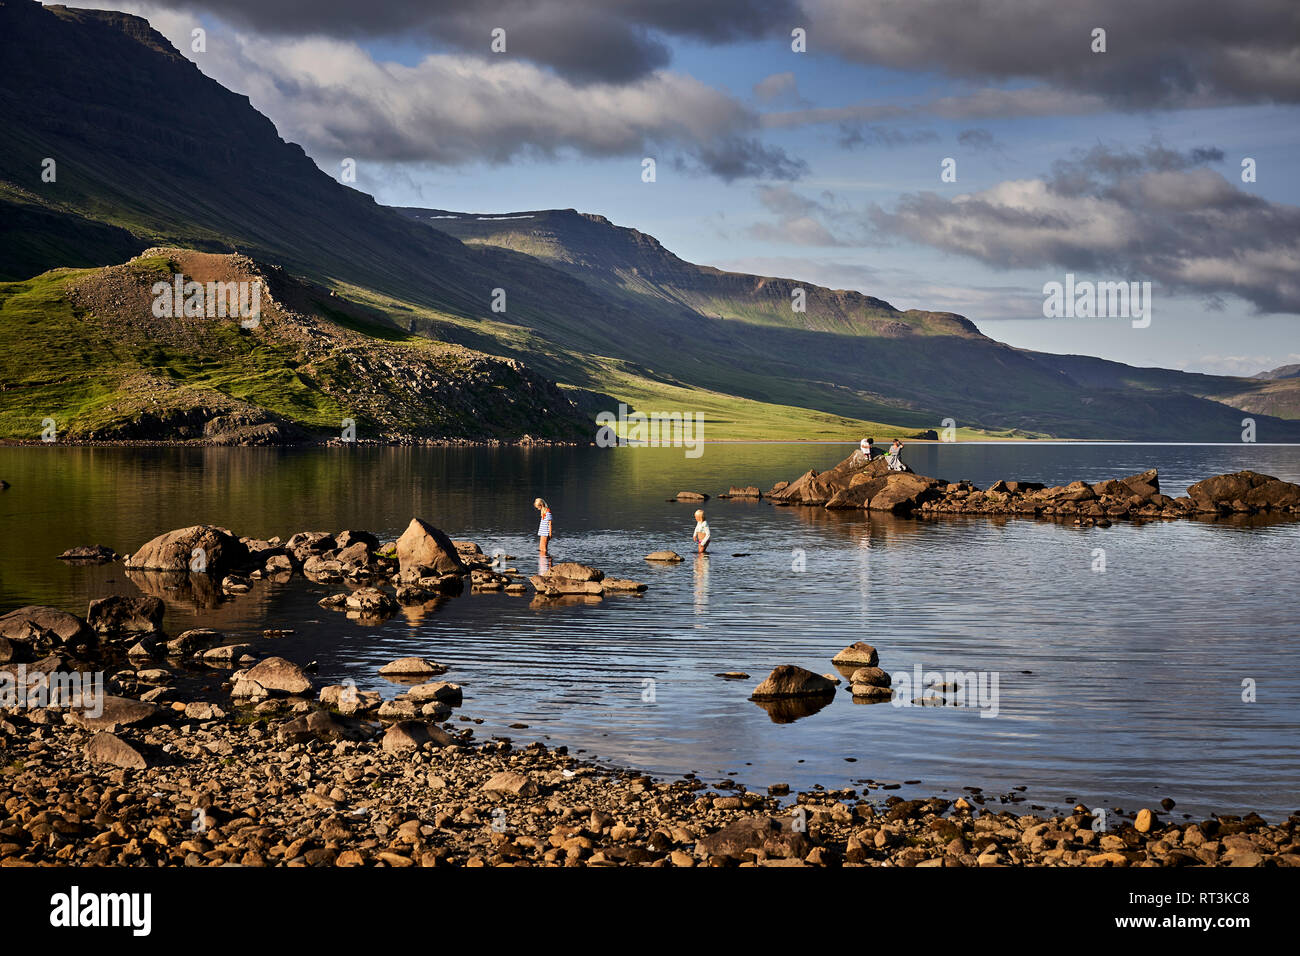 Kids playing in the water, Hitardalur, Western Iceland Stock Photo